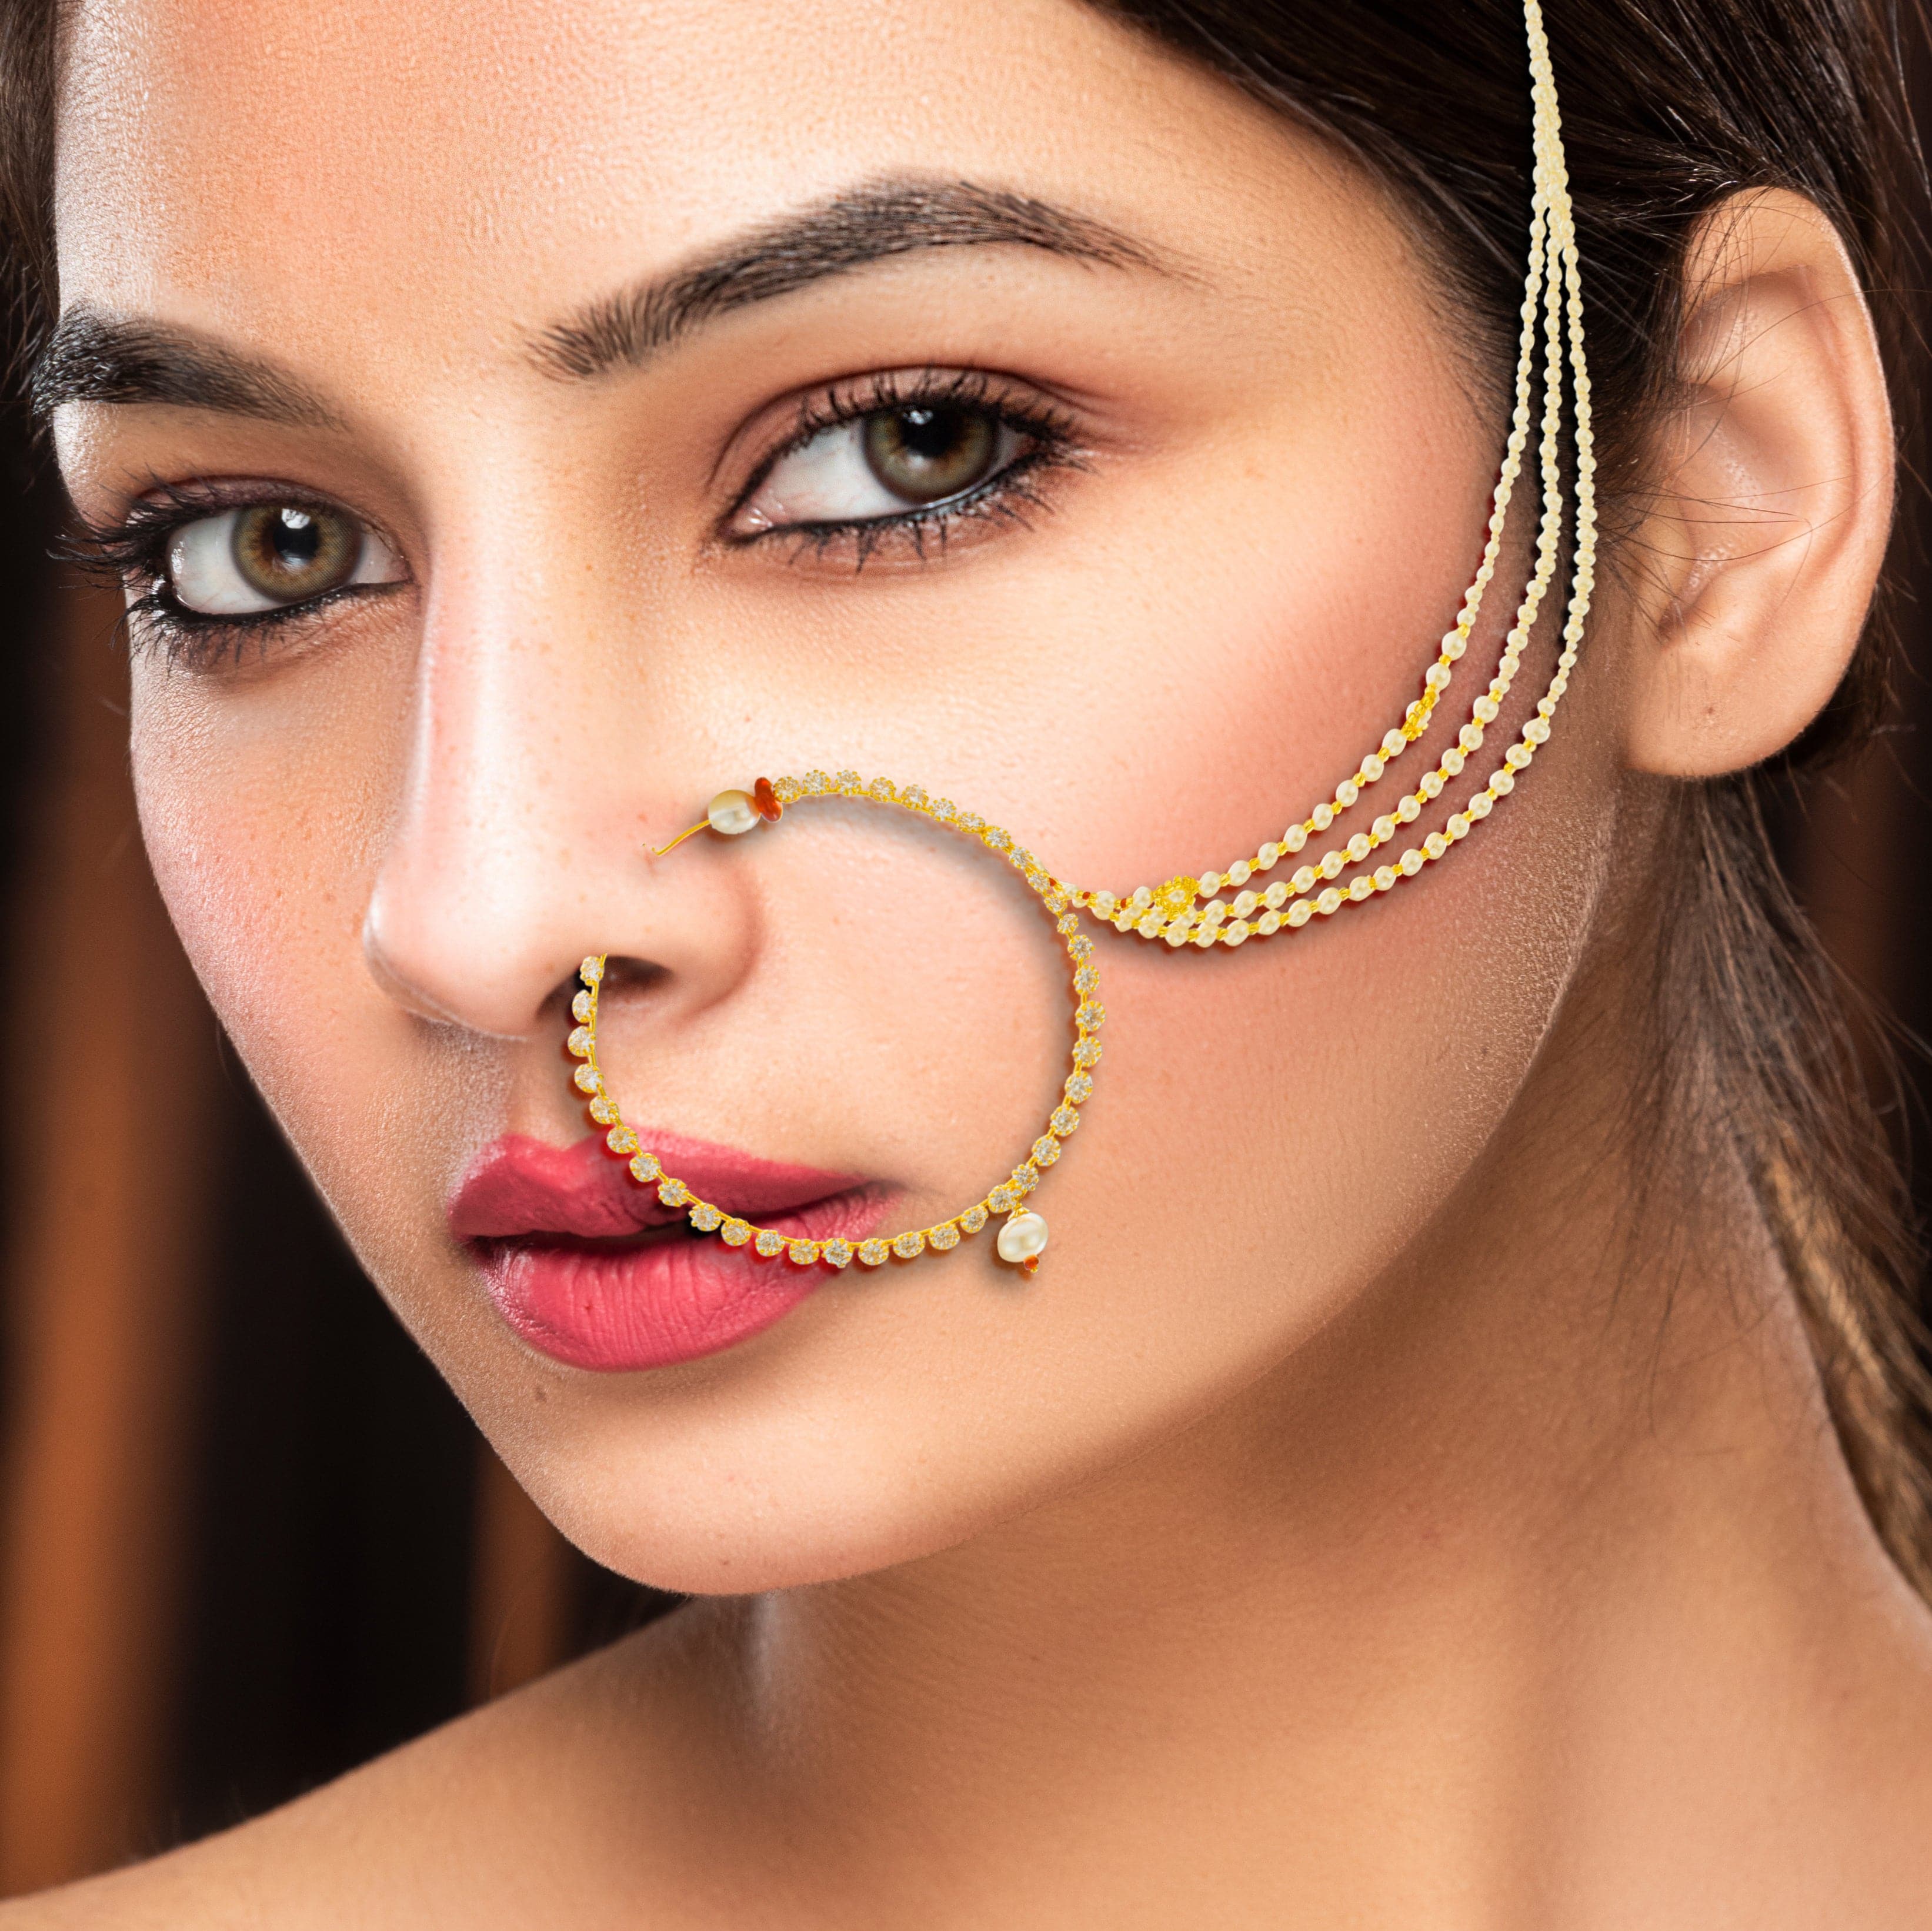 Buy Tiny Nose Ring, Nose Ring Hoop, Indian Nose Ring, Gold Nose Hoop, Gold  Nose Ring, Gold Nose Piercing, Nose Jewelry, Hoop Nose Ring, Online in  India - Etsy